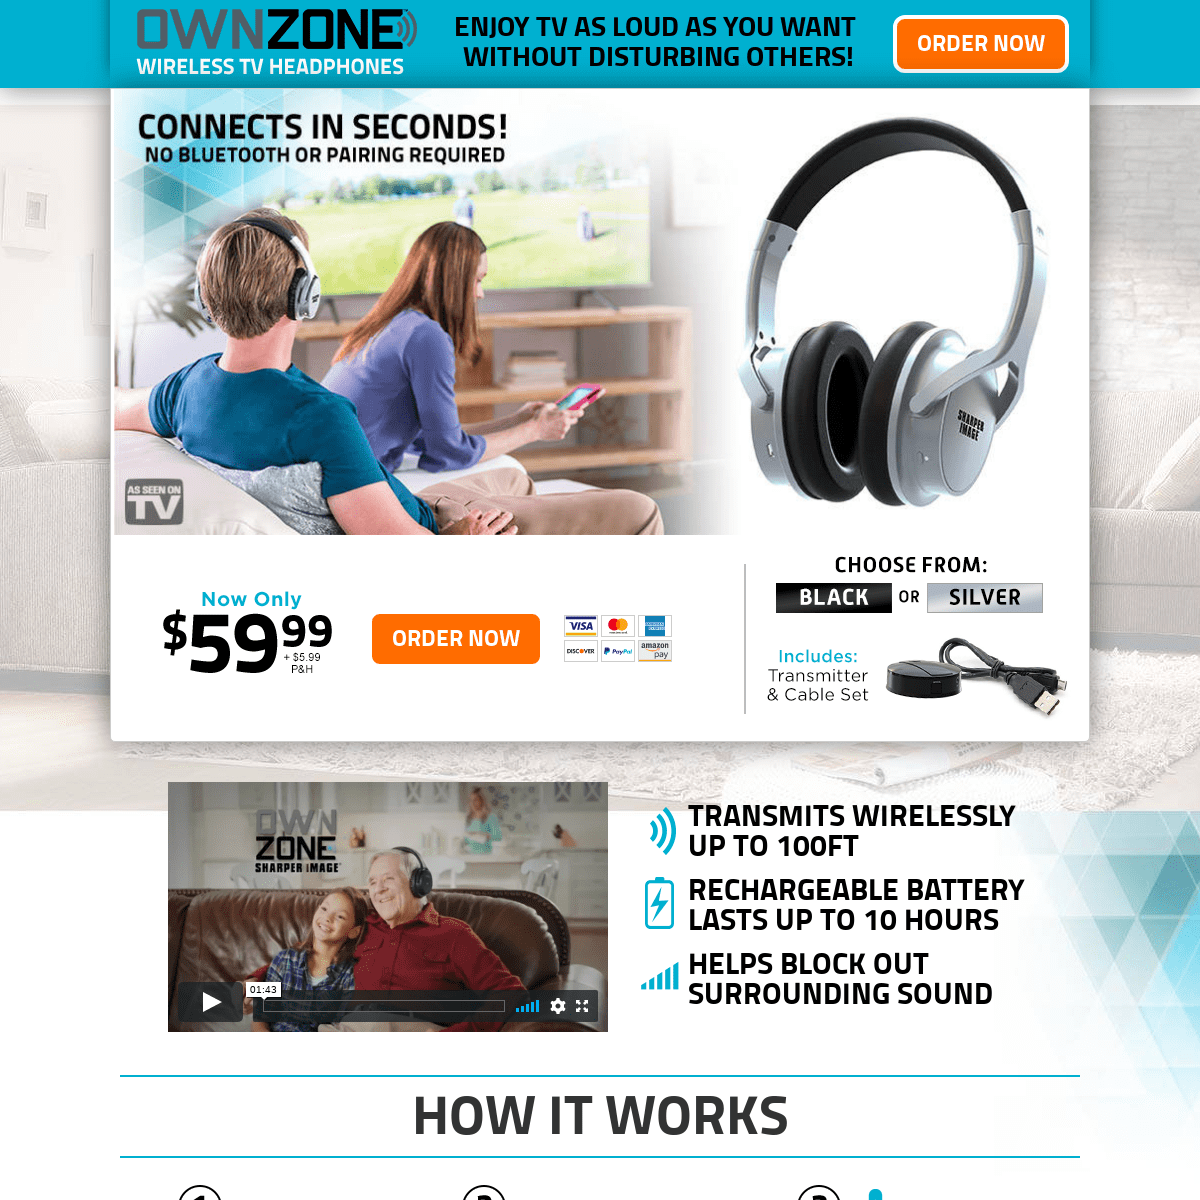 Own Zone™ - Enjoy TV As Loud As You Want Without Disturbing Others!